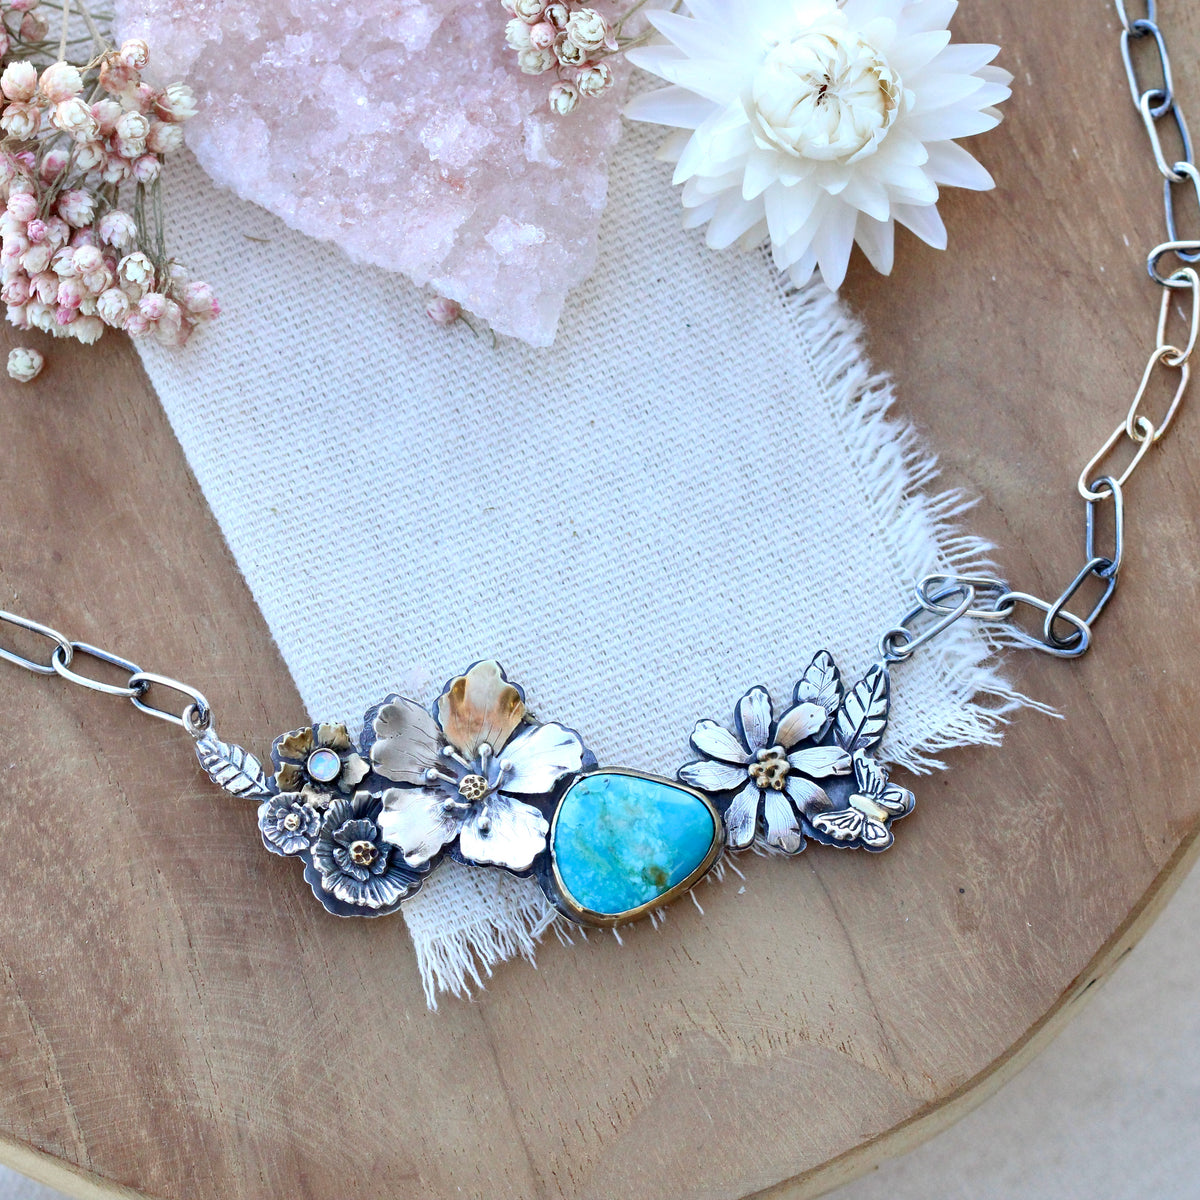 Turquoise floral statement necklace with 18k gold accents